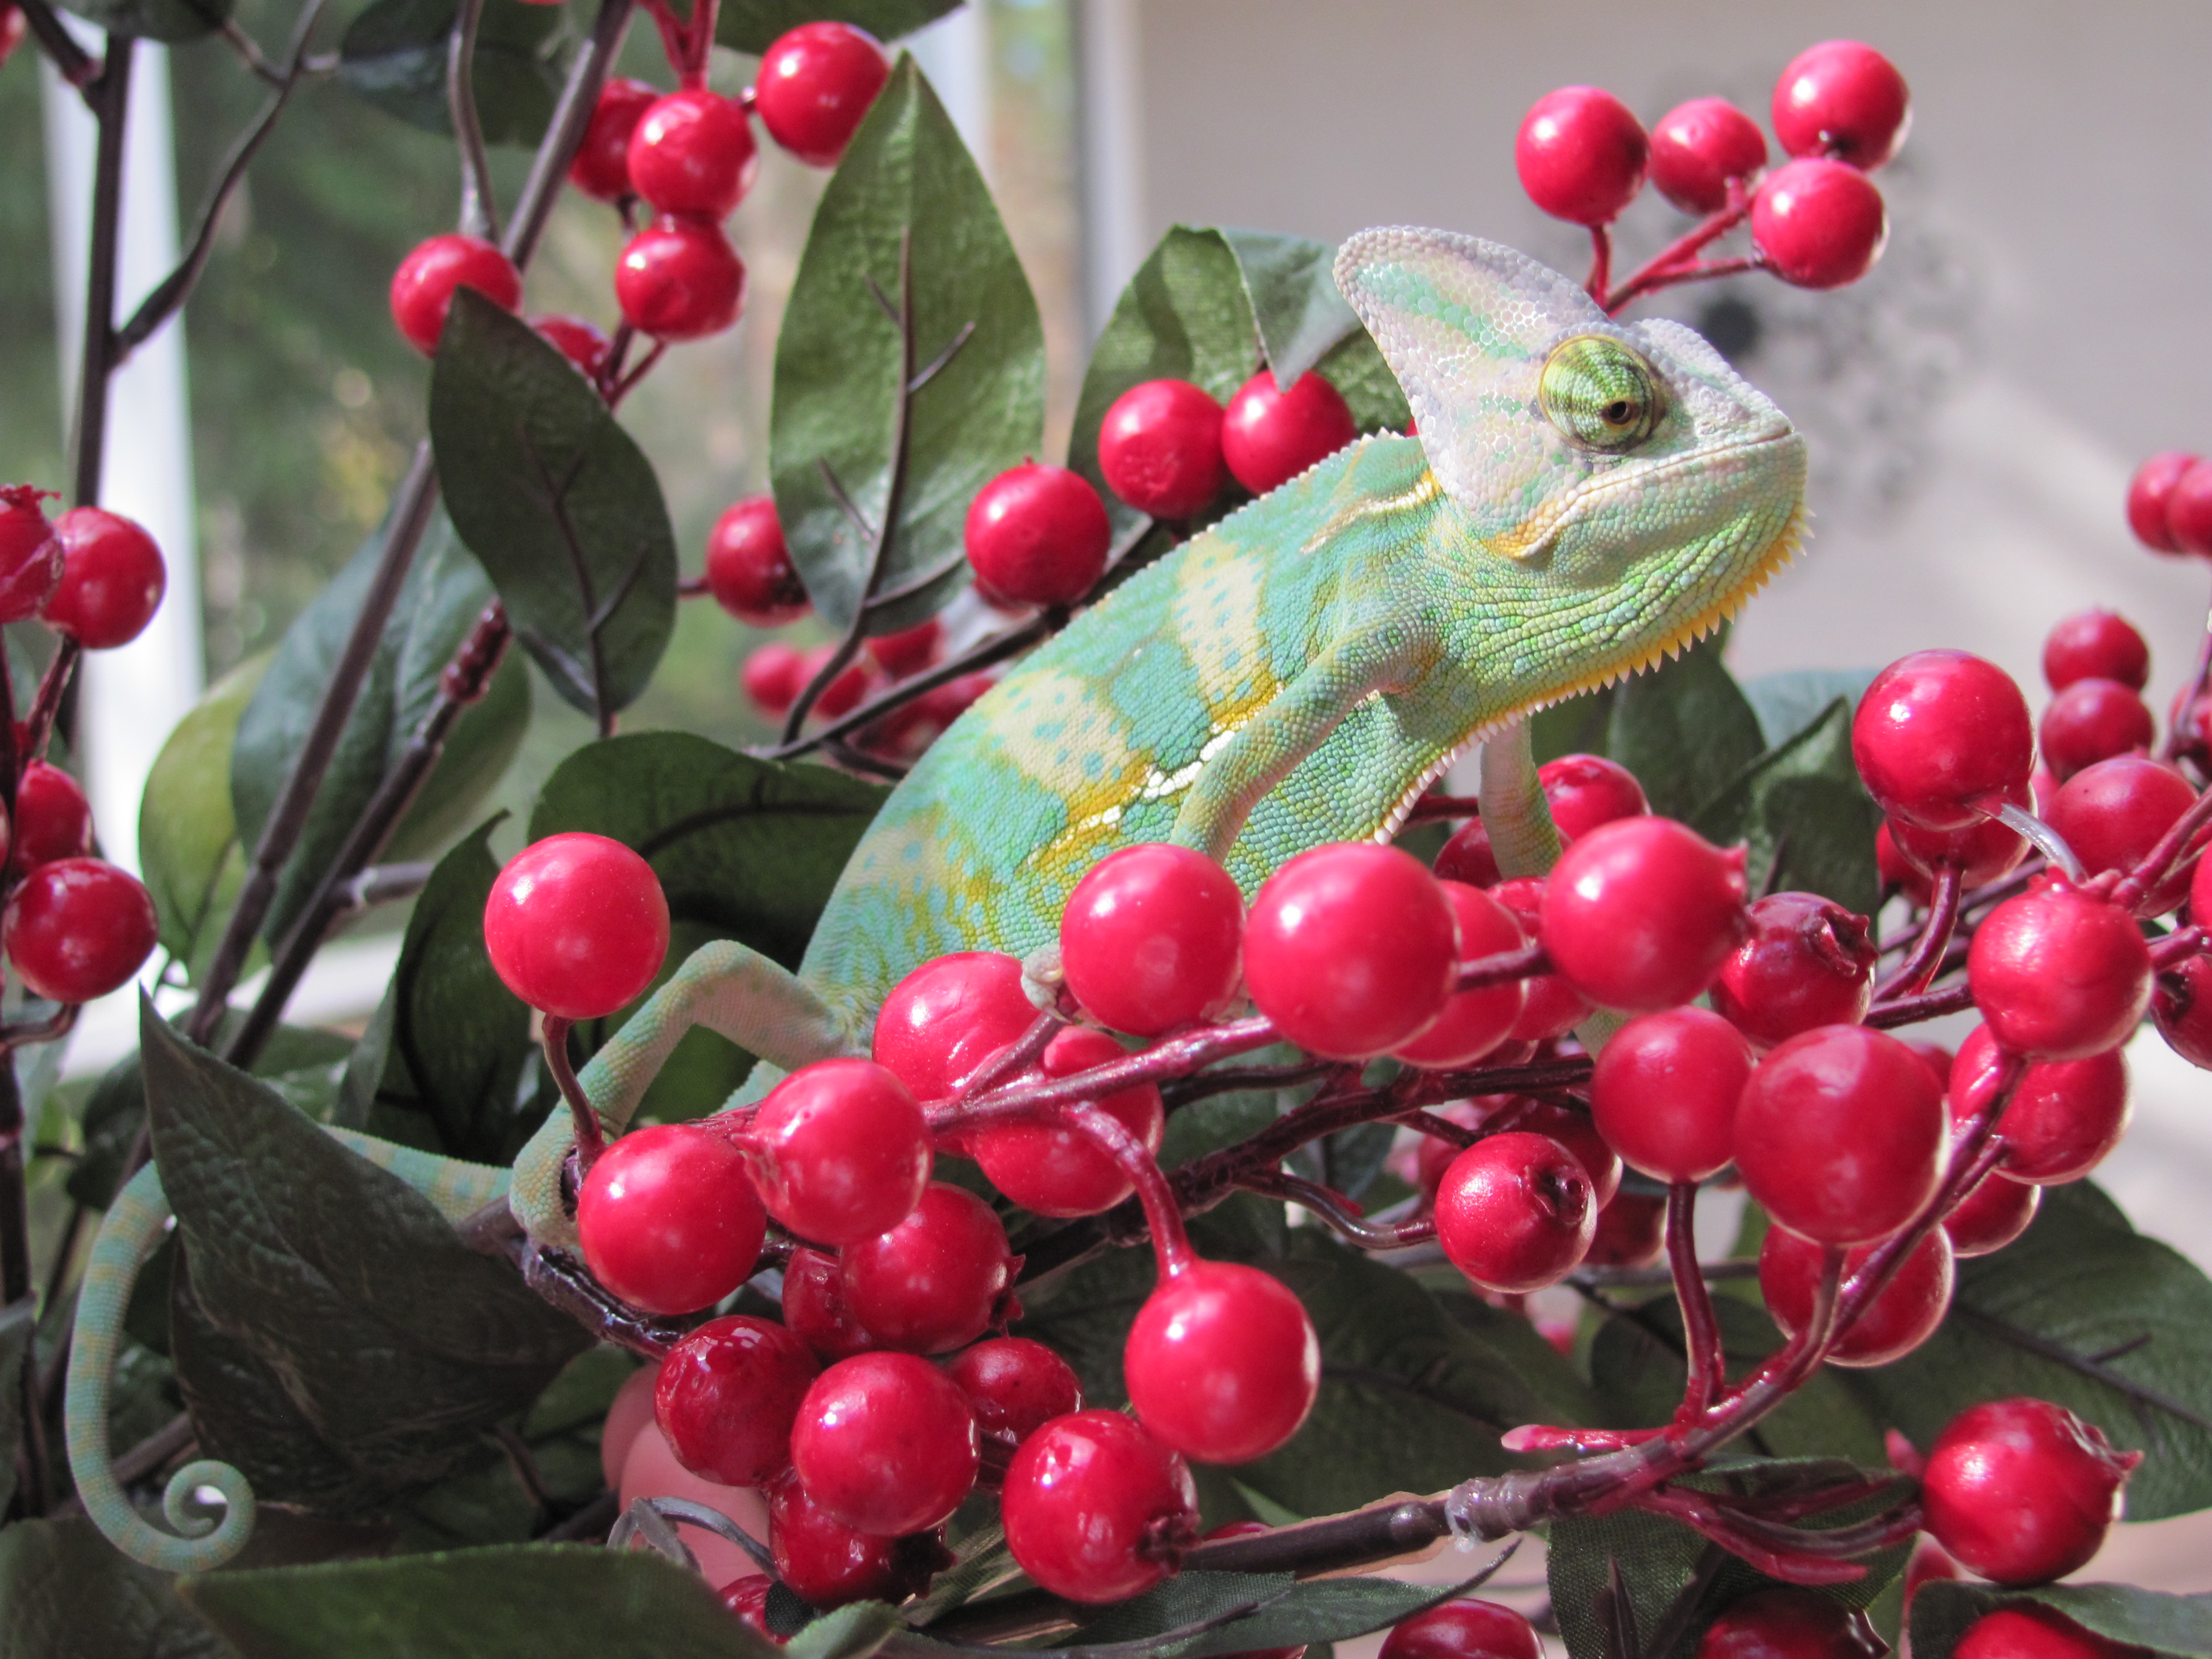 Have A Berry Nice Holiday Season!